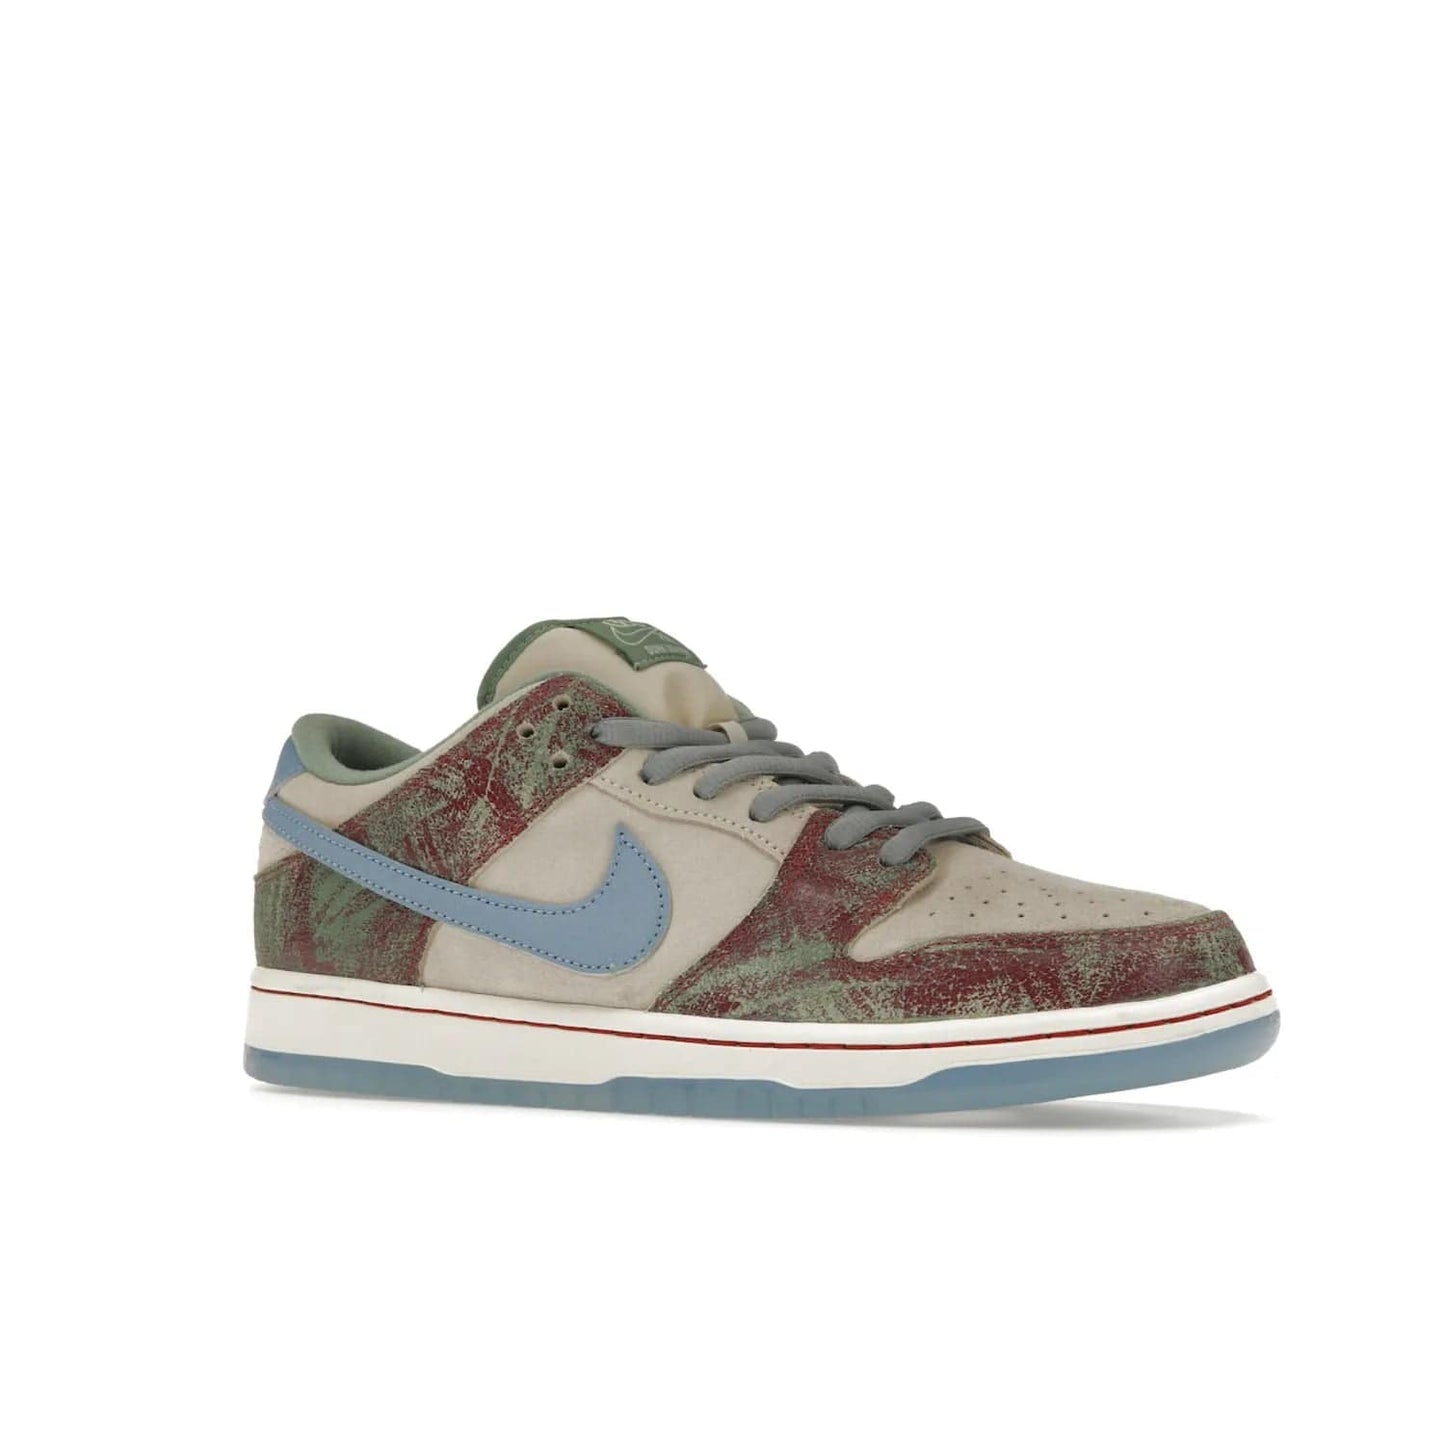 Nike SB Dunk Low Crenshaw Skate Club - Image 4 - Only at www.BallersClubKickz.com - Introducing the Nike SB Dunk Low Crenshaw Skate Club! Classic skate shoes with Sail and Light Blue upper, Cedar accents, padded collars and superior grip for comfortable, stable performance and style. Ideal for any skate session.